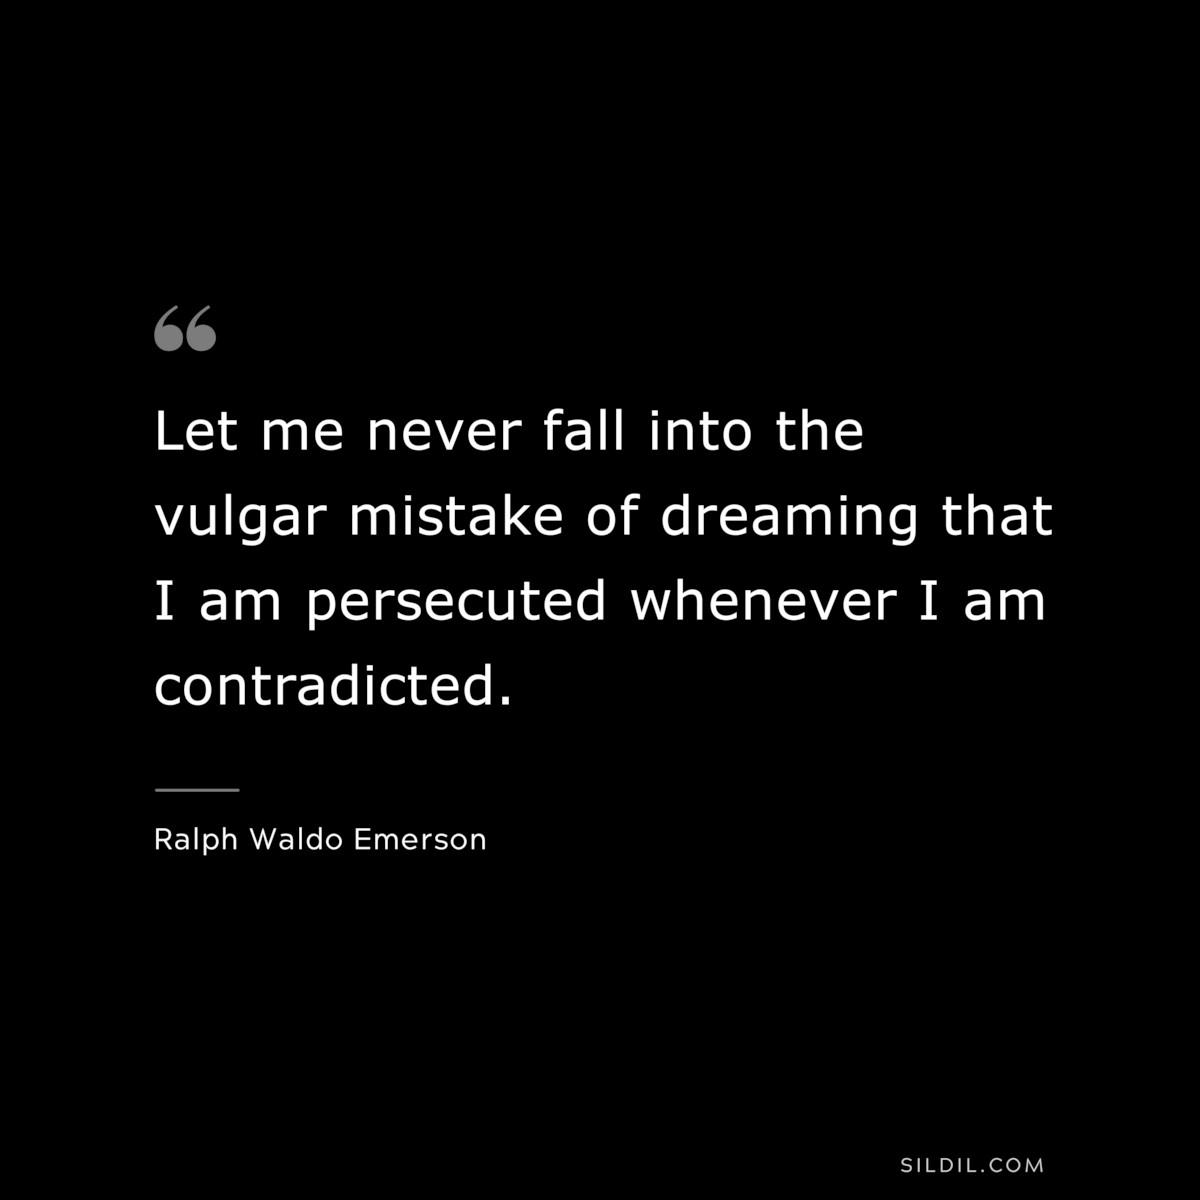 Let me never fall into the vulgar mistake of dreaming that I am persecuted whenever I am contradicted. — Ralph Waldo Emerson